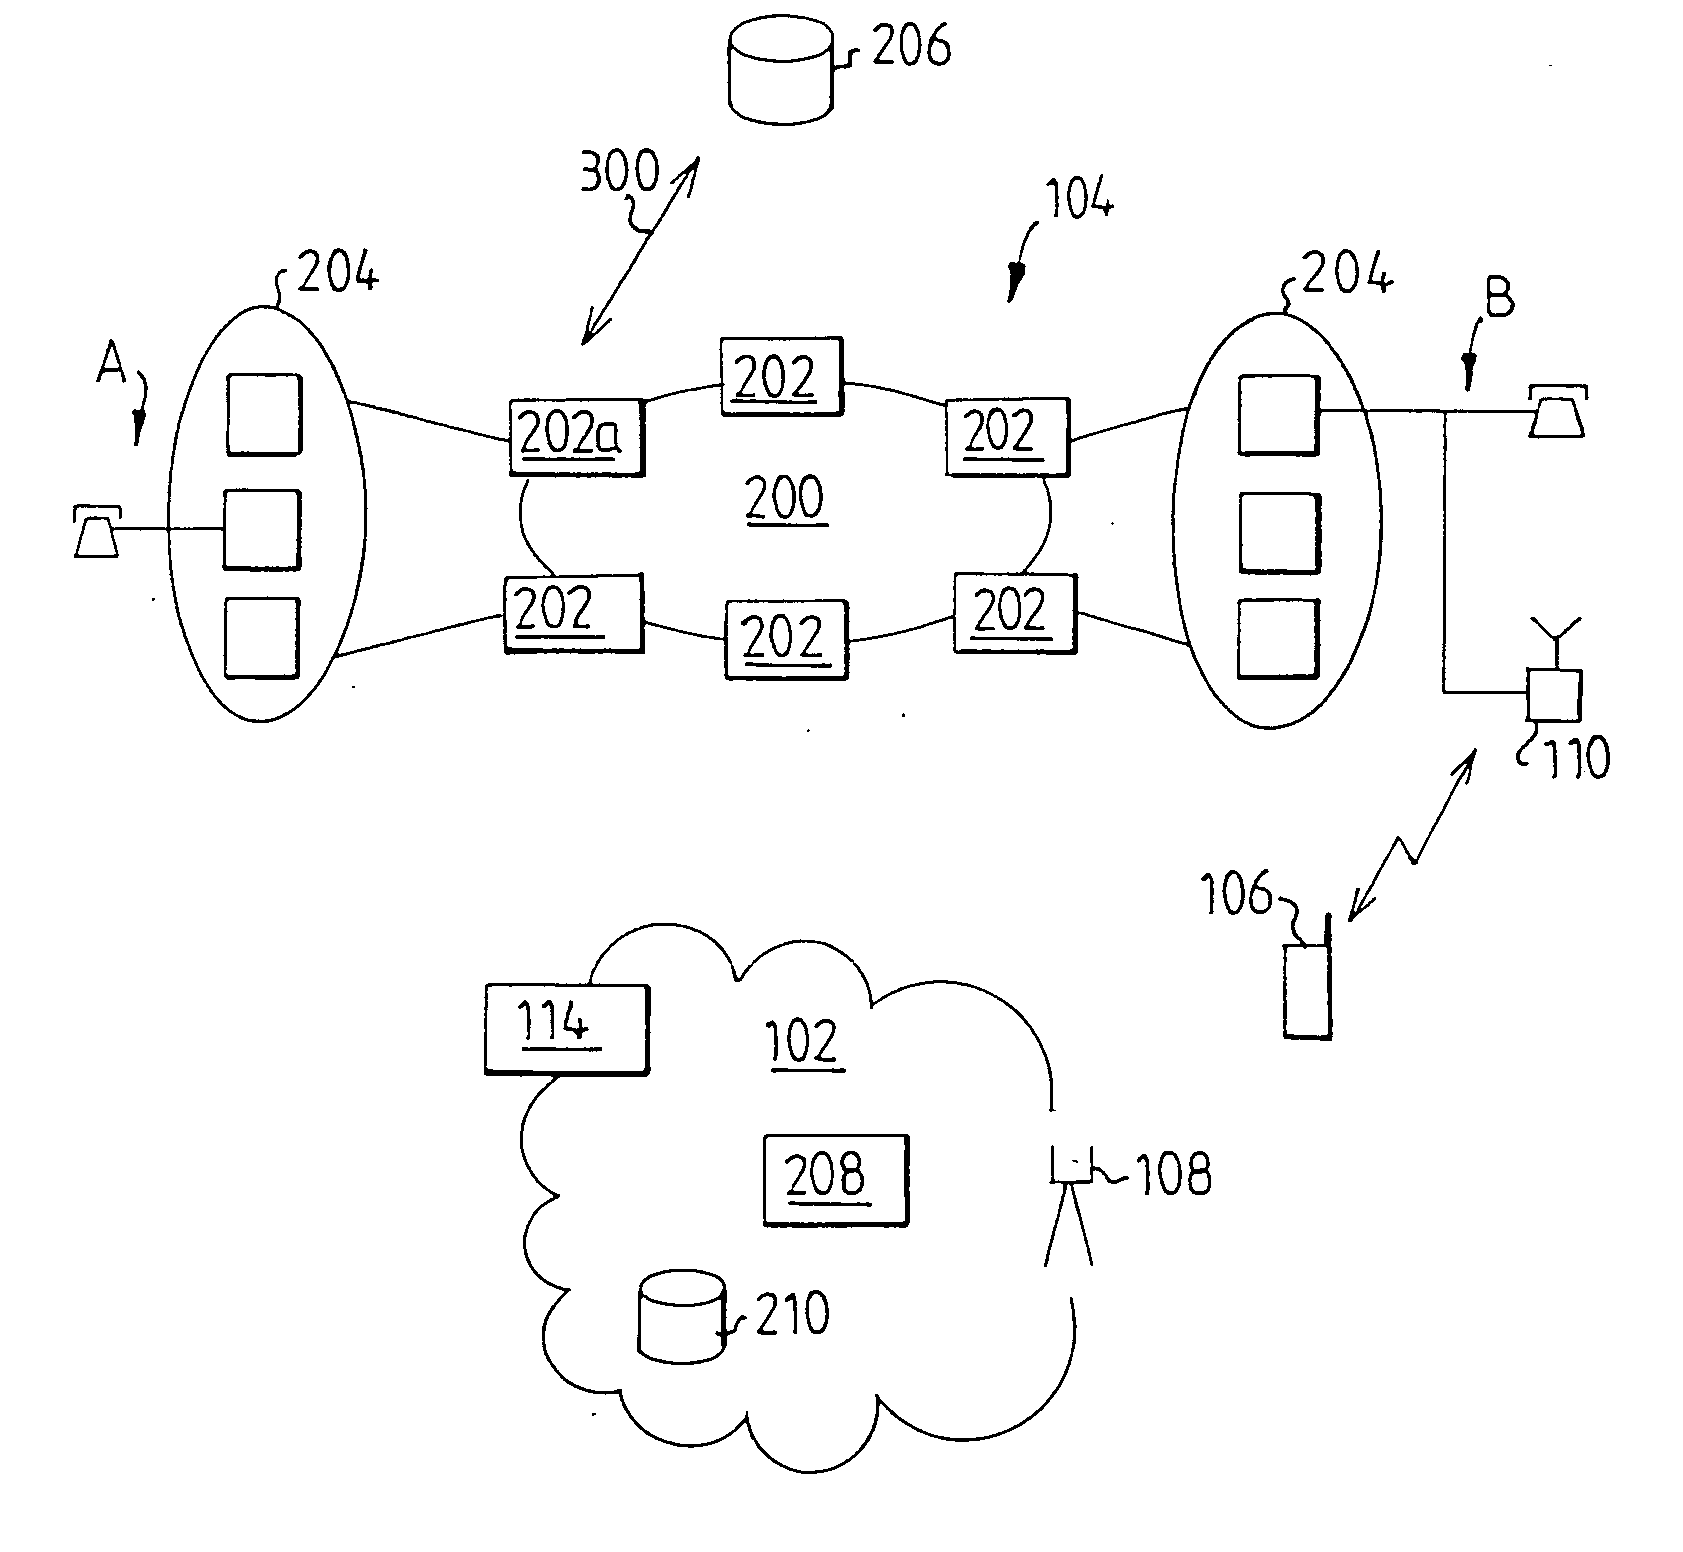 System and method for providing telecommunication services